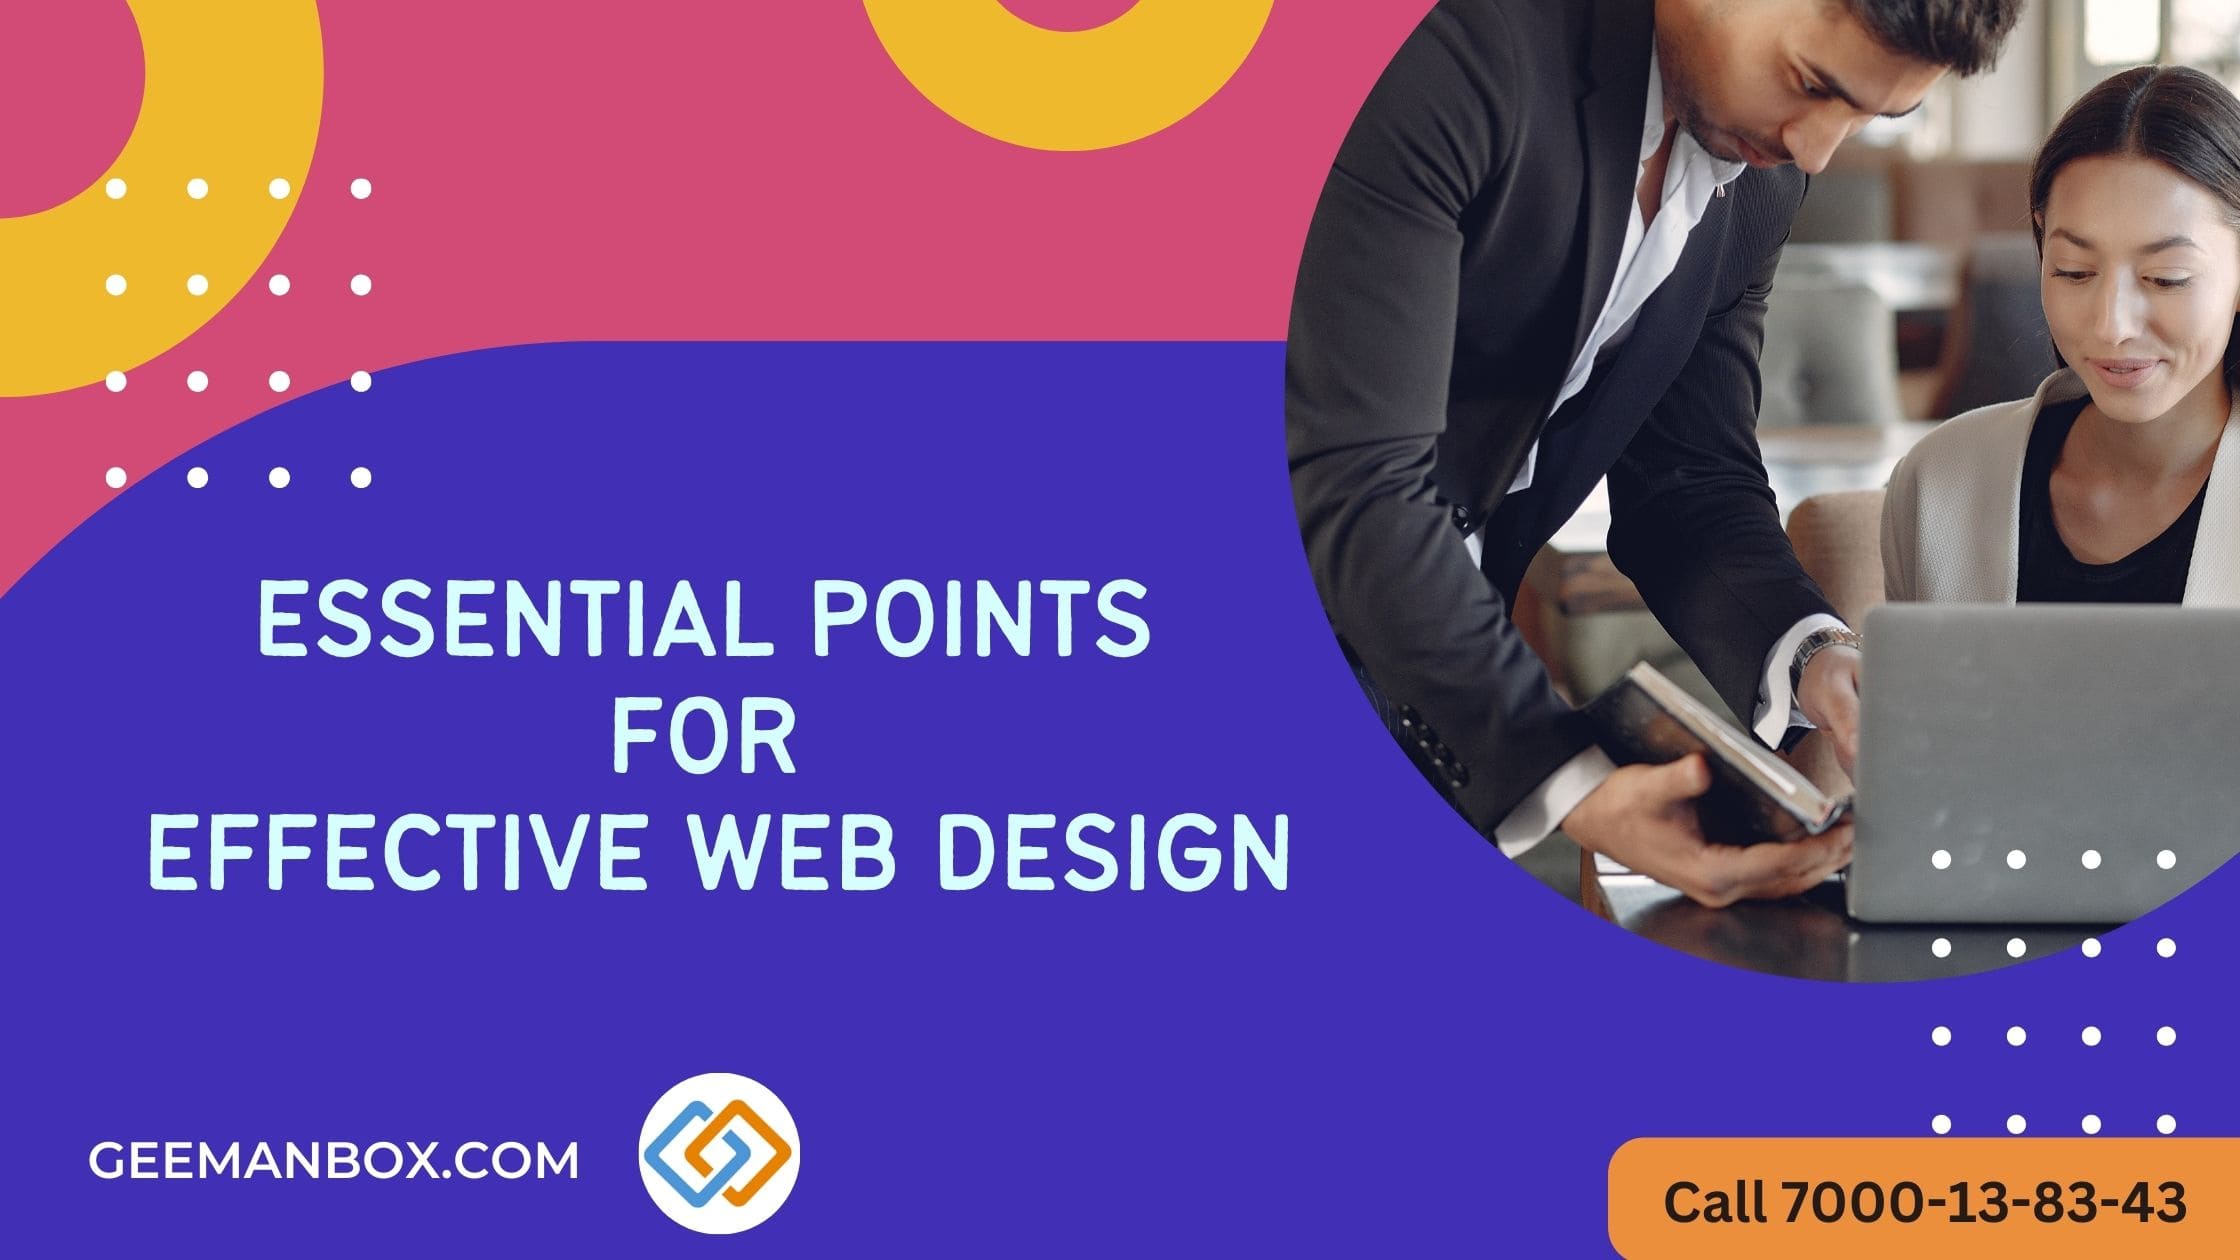 Essential Points for Effective Web Design